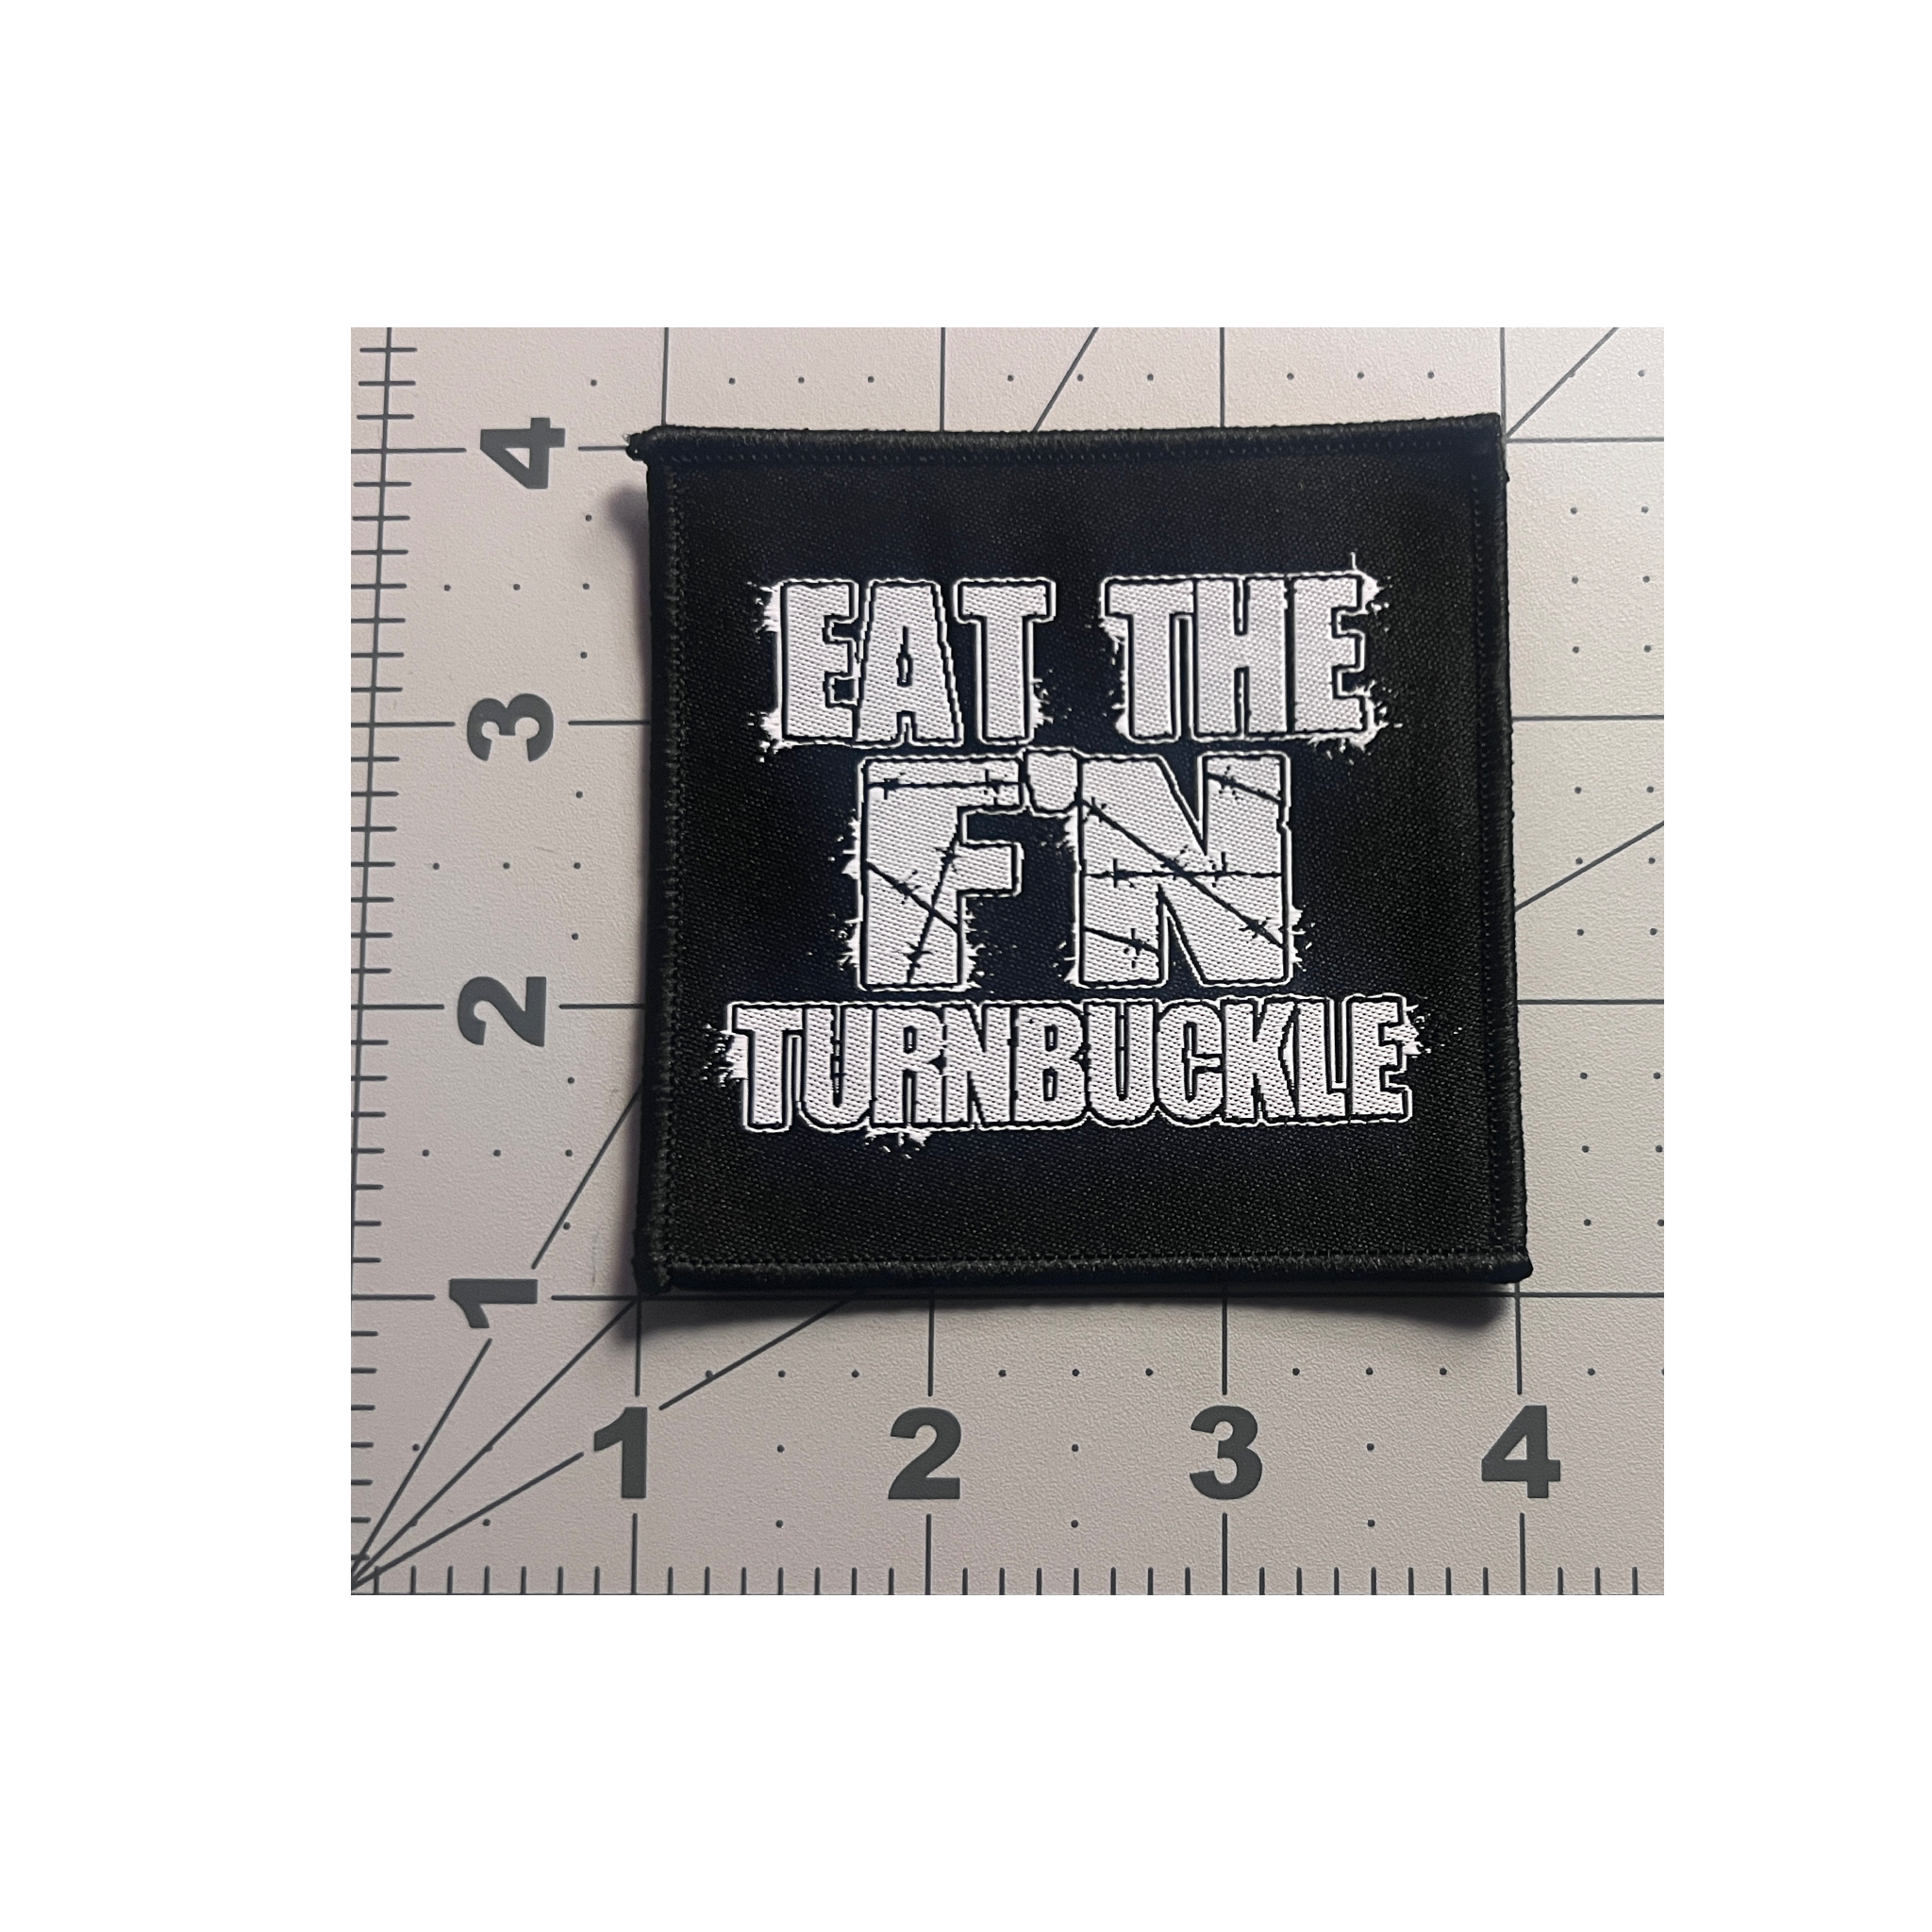 Eat The Turnbuckle Patches (Two for $10 Deal)